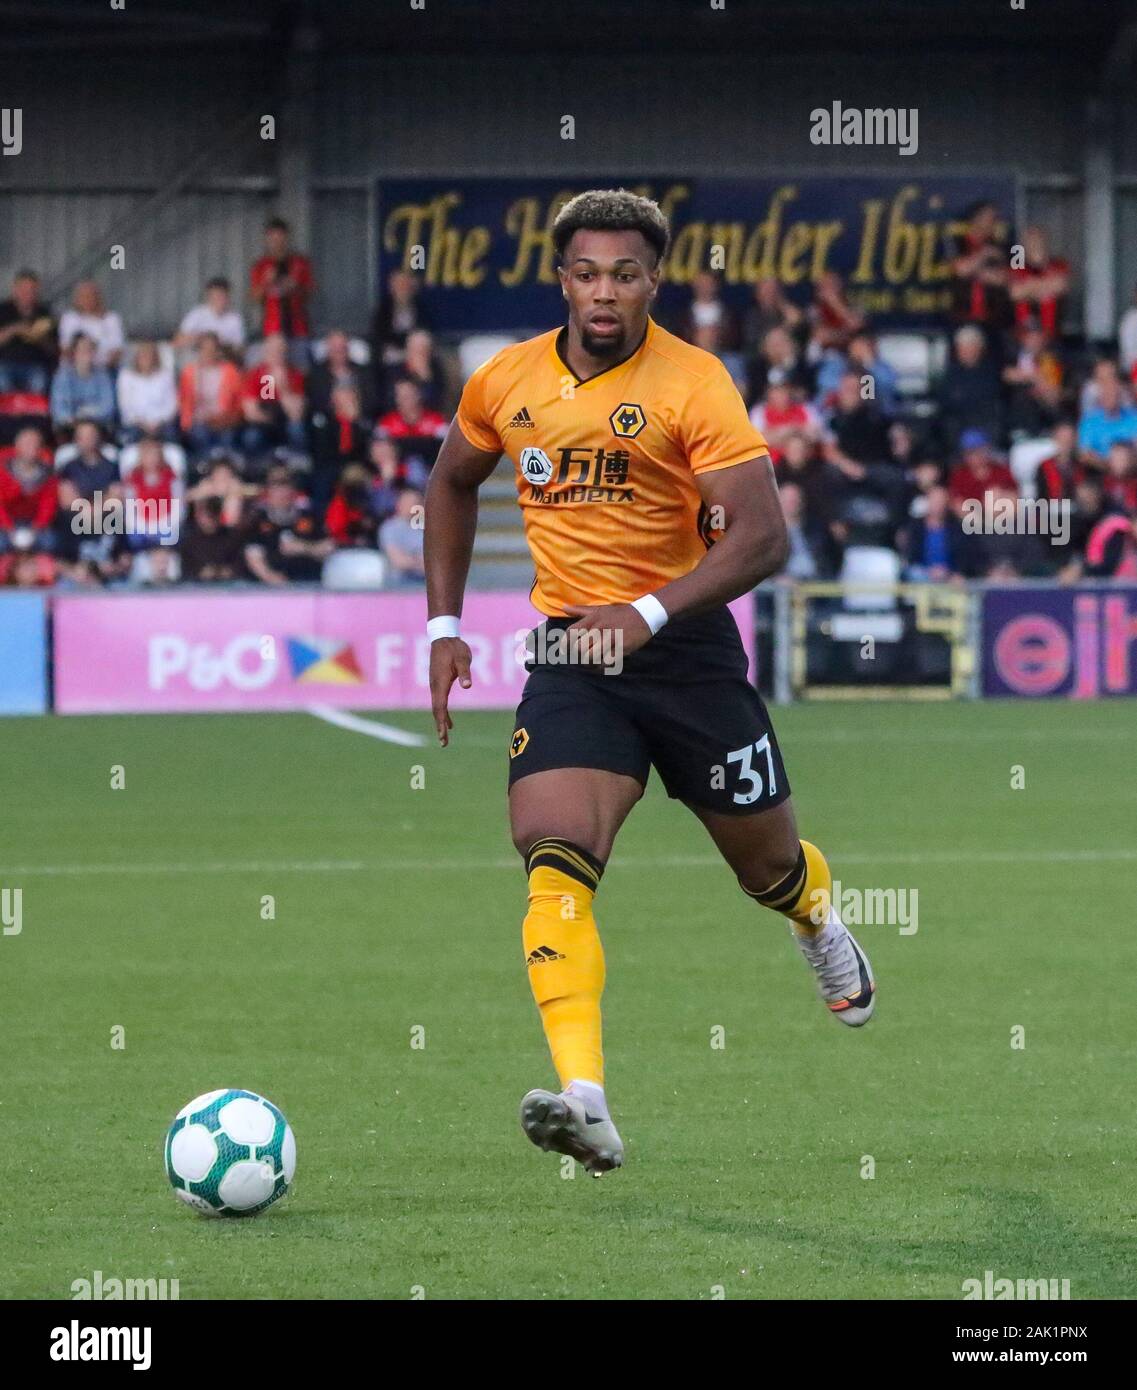 Seaview Stadium, Belfast, Northern Ireland. 01st Aug, 2019. UEFA Europa League Second Qualifying Round (Second Leg) Crusaders (red/black) v Wolves. Wolverhampton Wanderers player Adama Traore (37) in action. Stock Photo